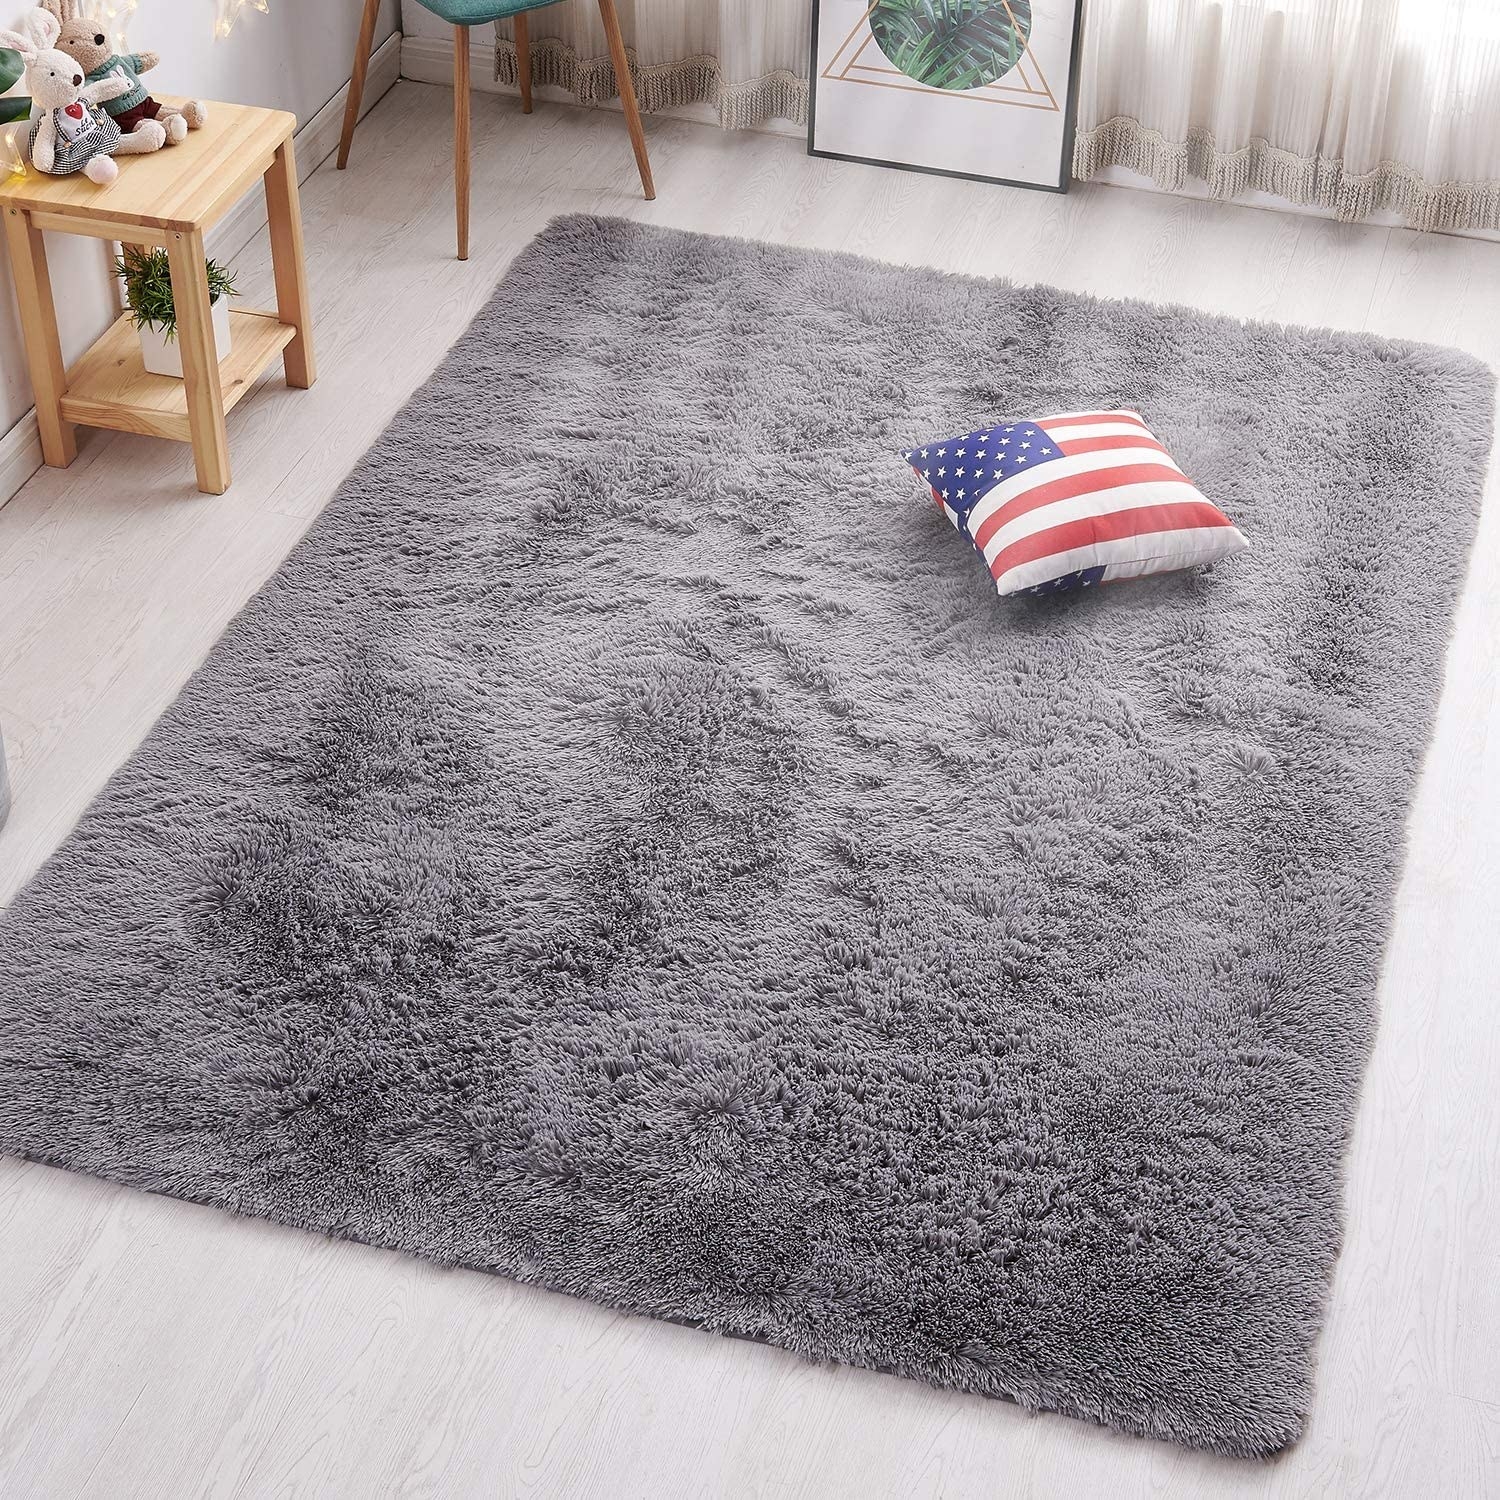 The shaggy rug in a living room